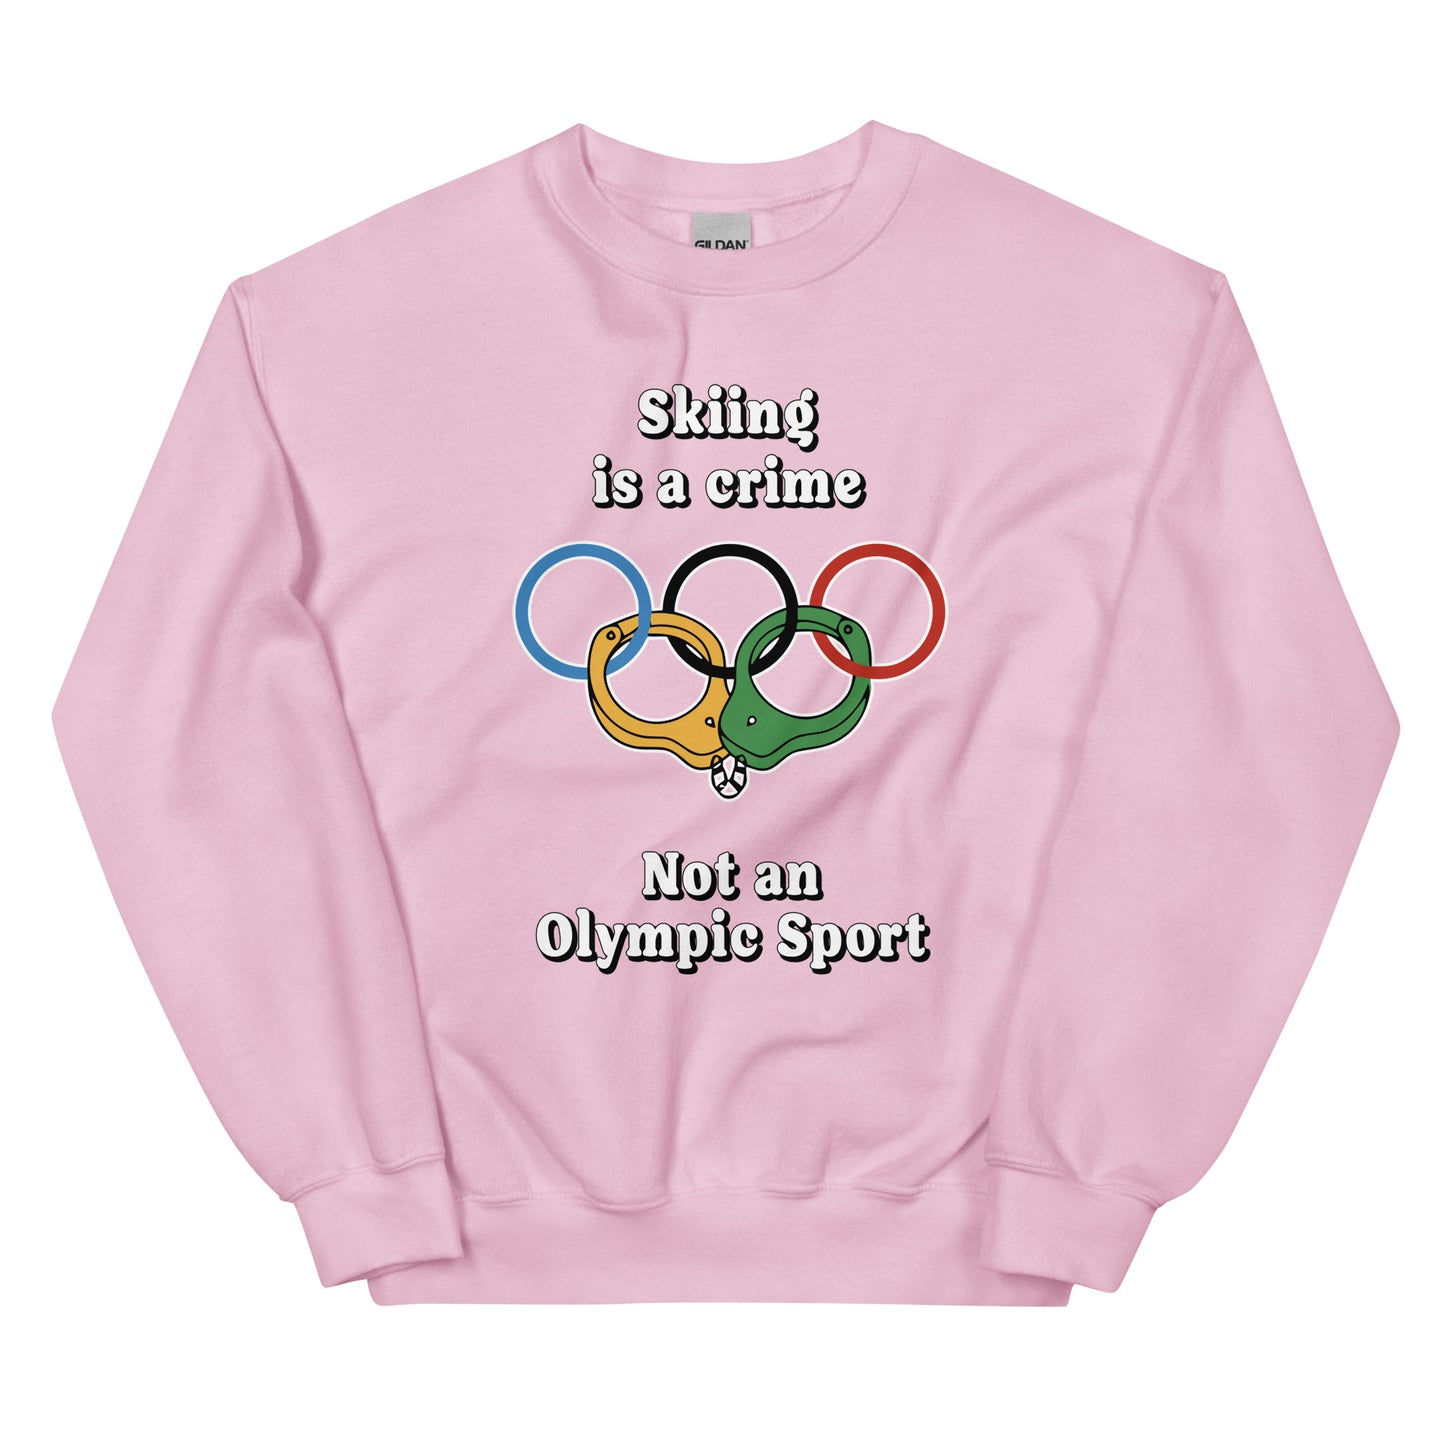 Skiing is a crime not an olympic sport design printed on a crewneck sweatshirt by Whistler Shirts